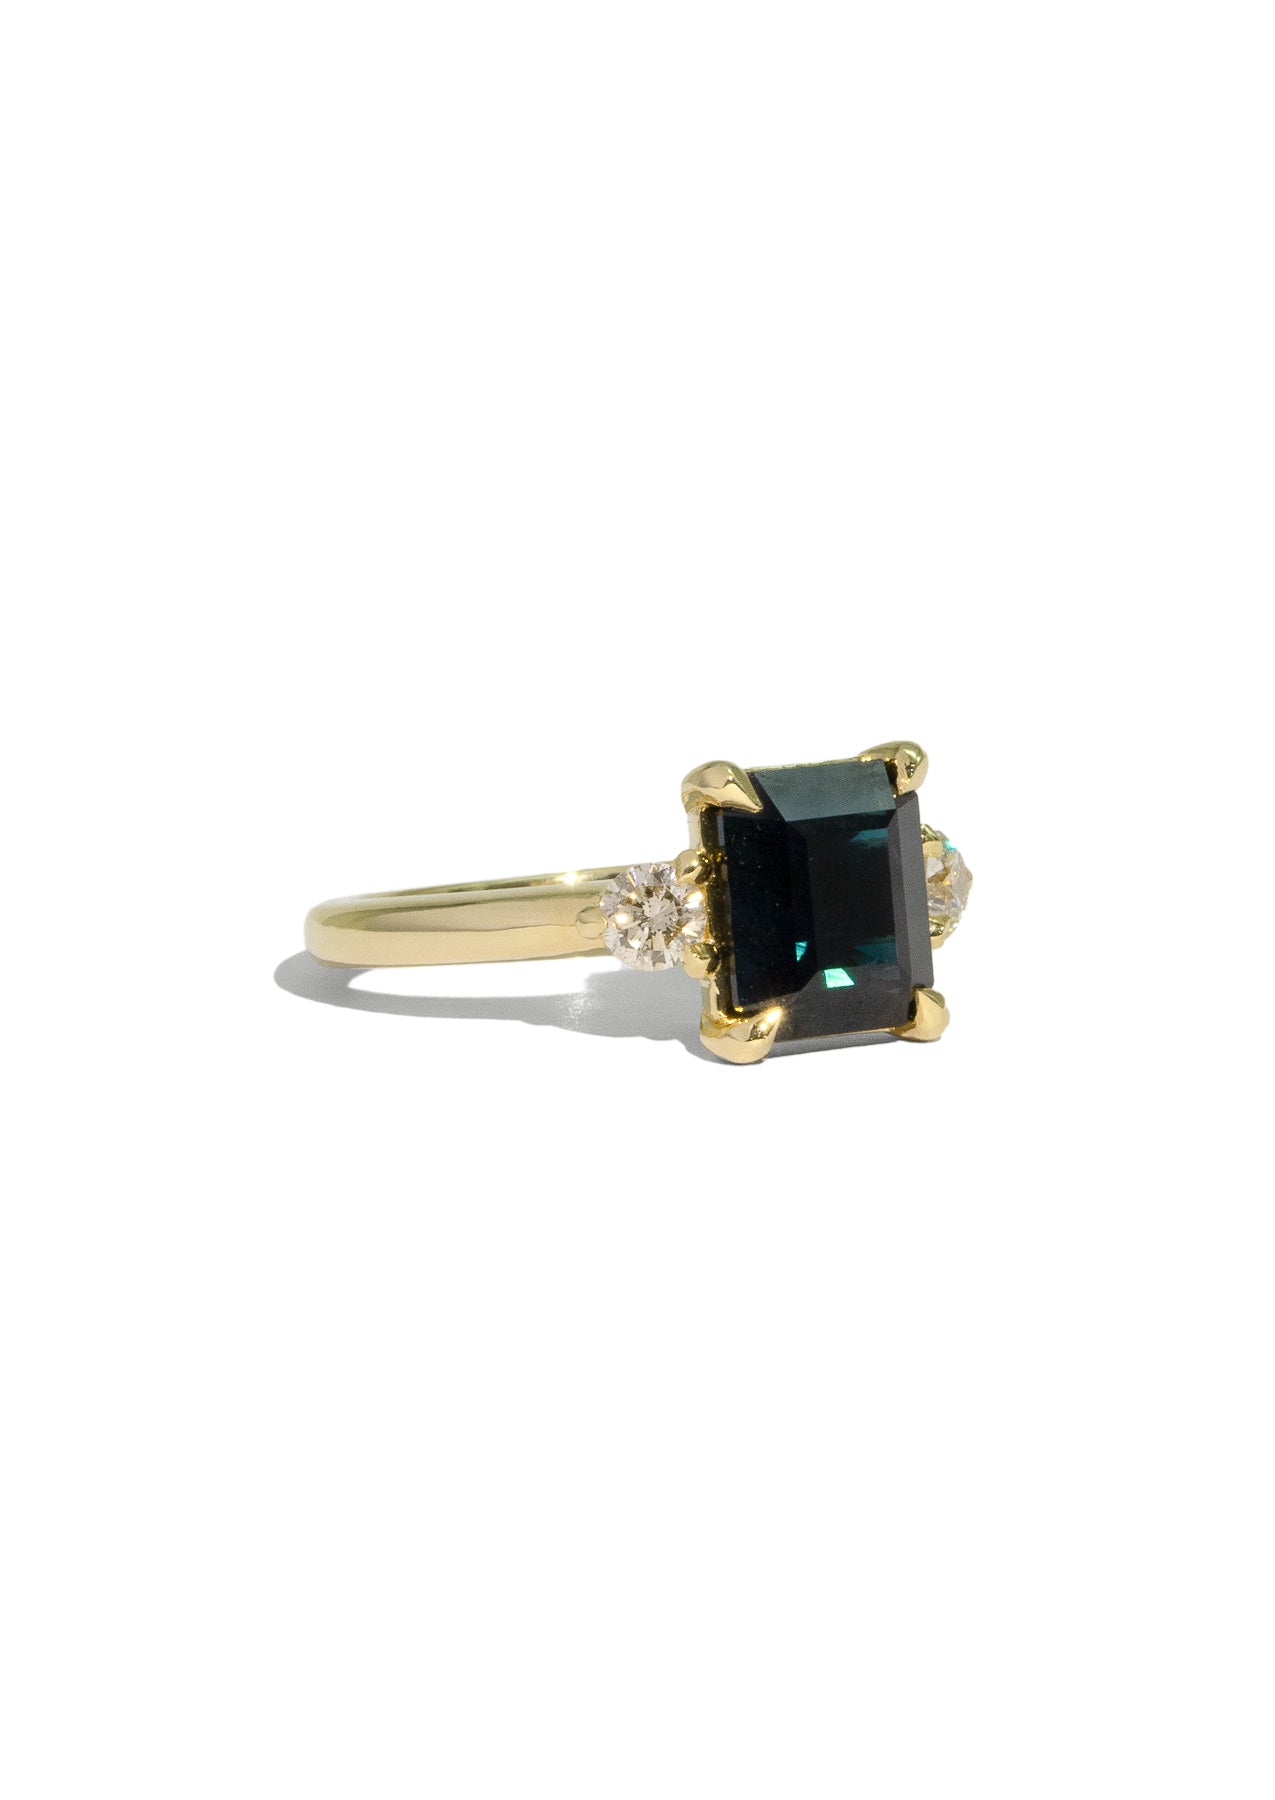 The Paige Parti Sapphire Ring